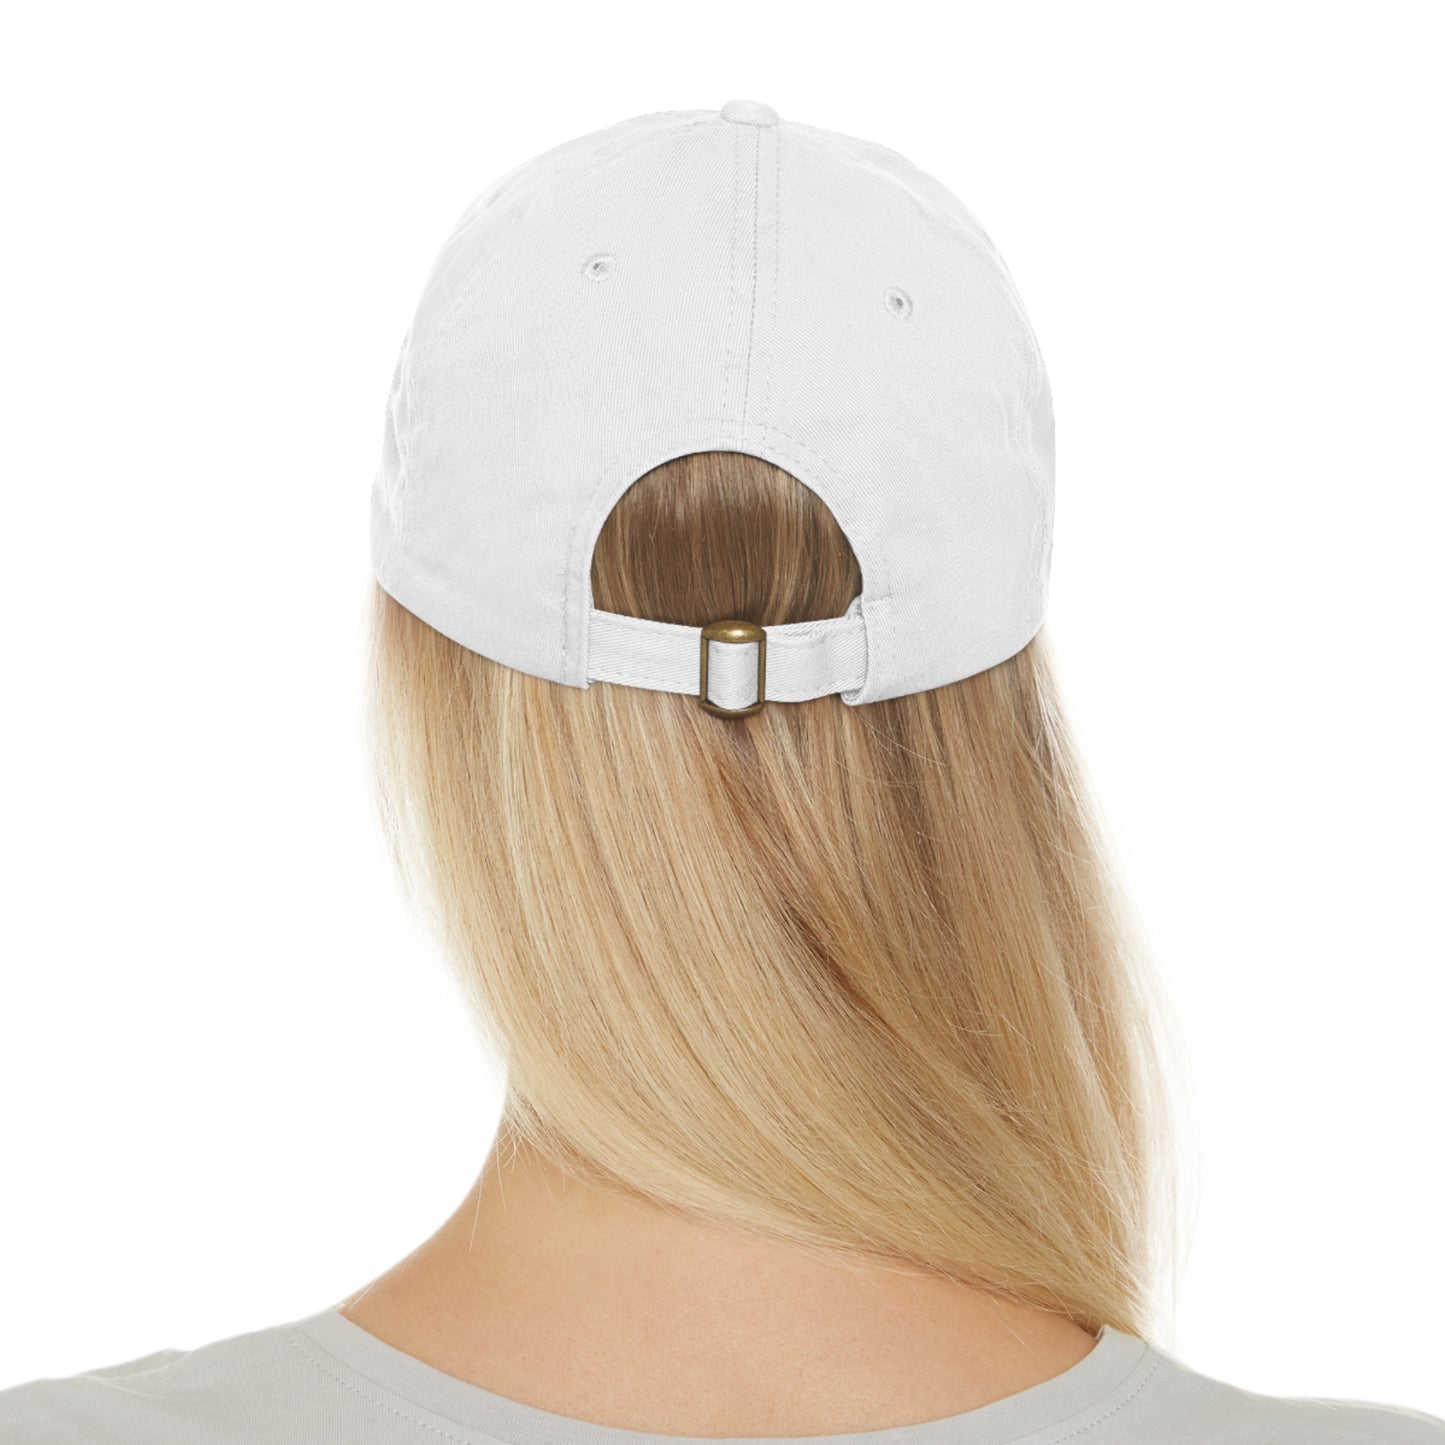 Camp SoberFest Dad Hat with Leather Patch (Round)